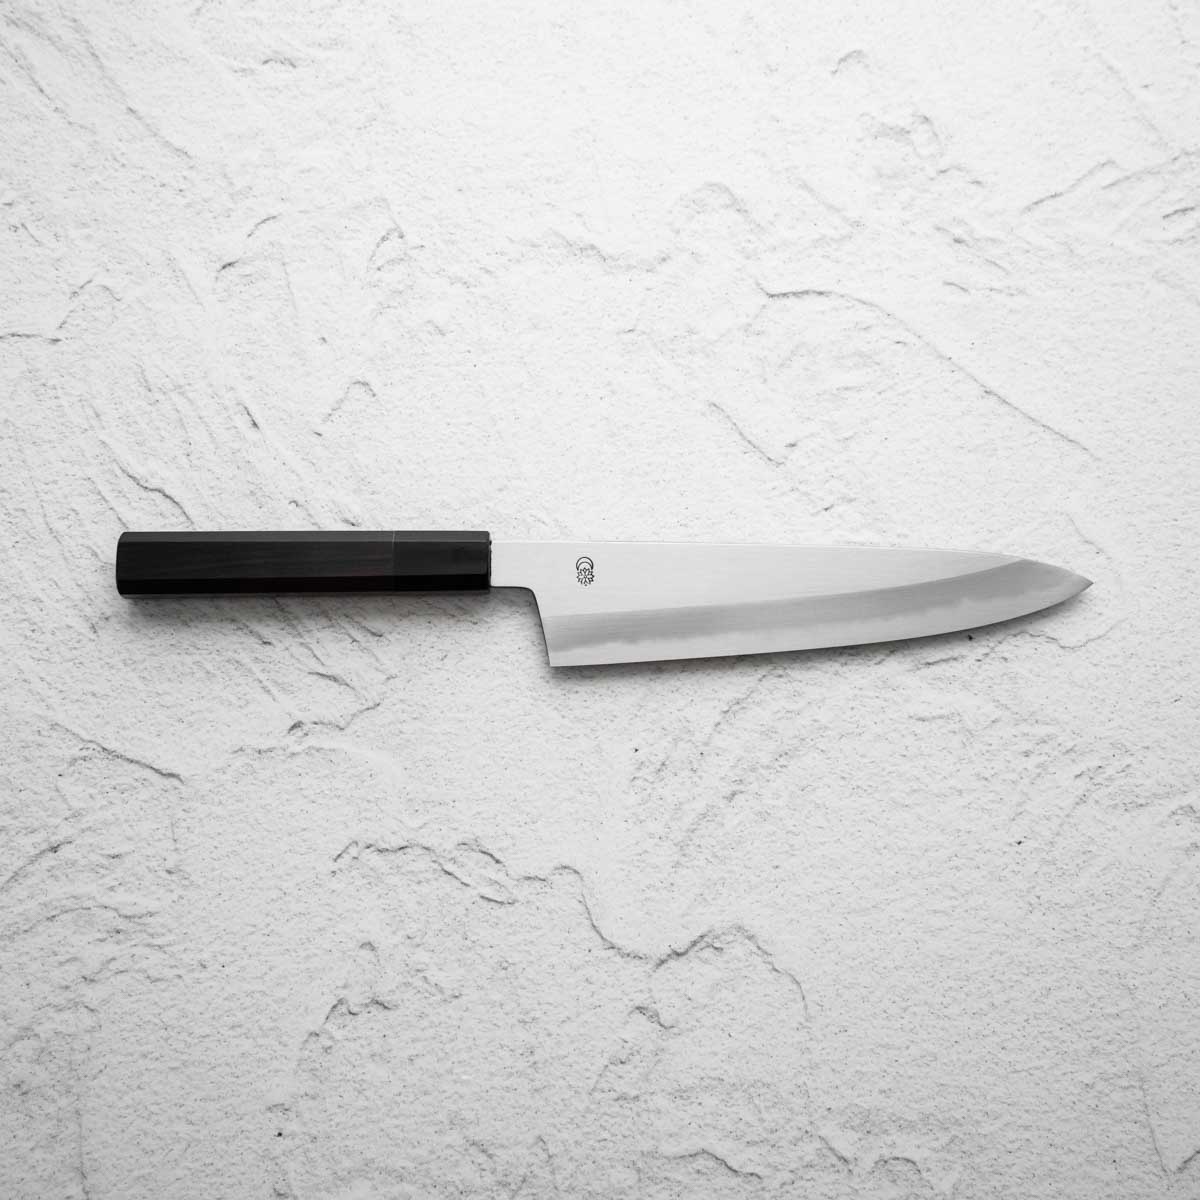 Chef or Santoku? What's the difference?